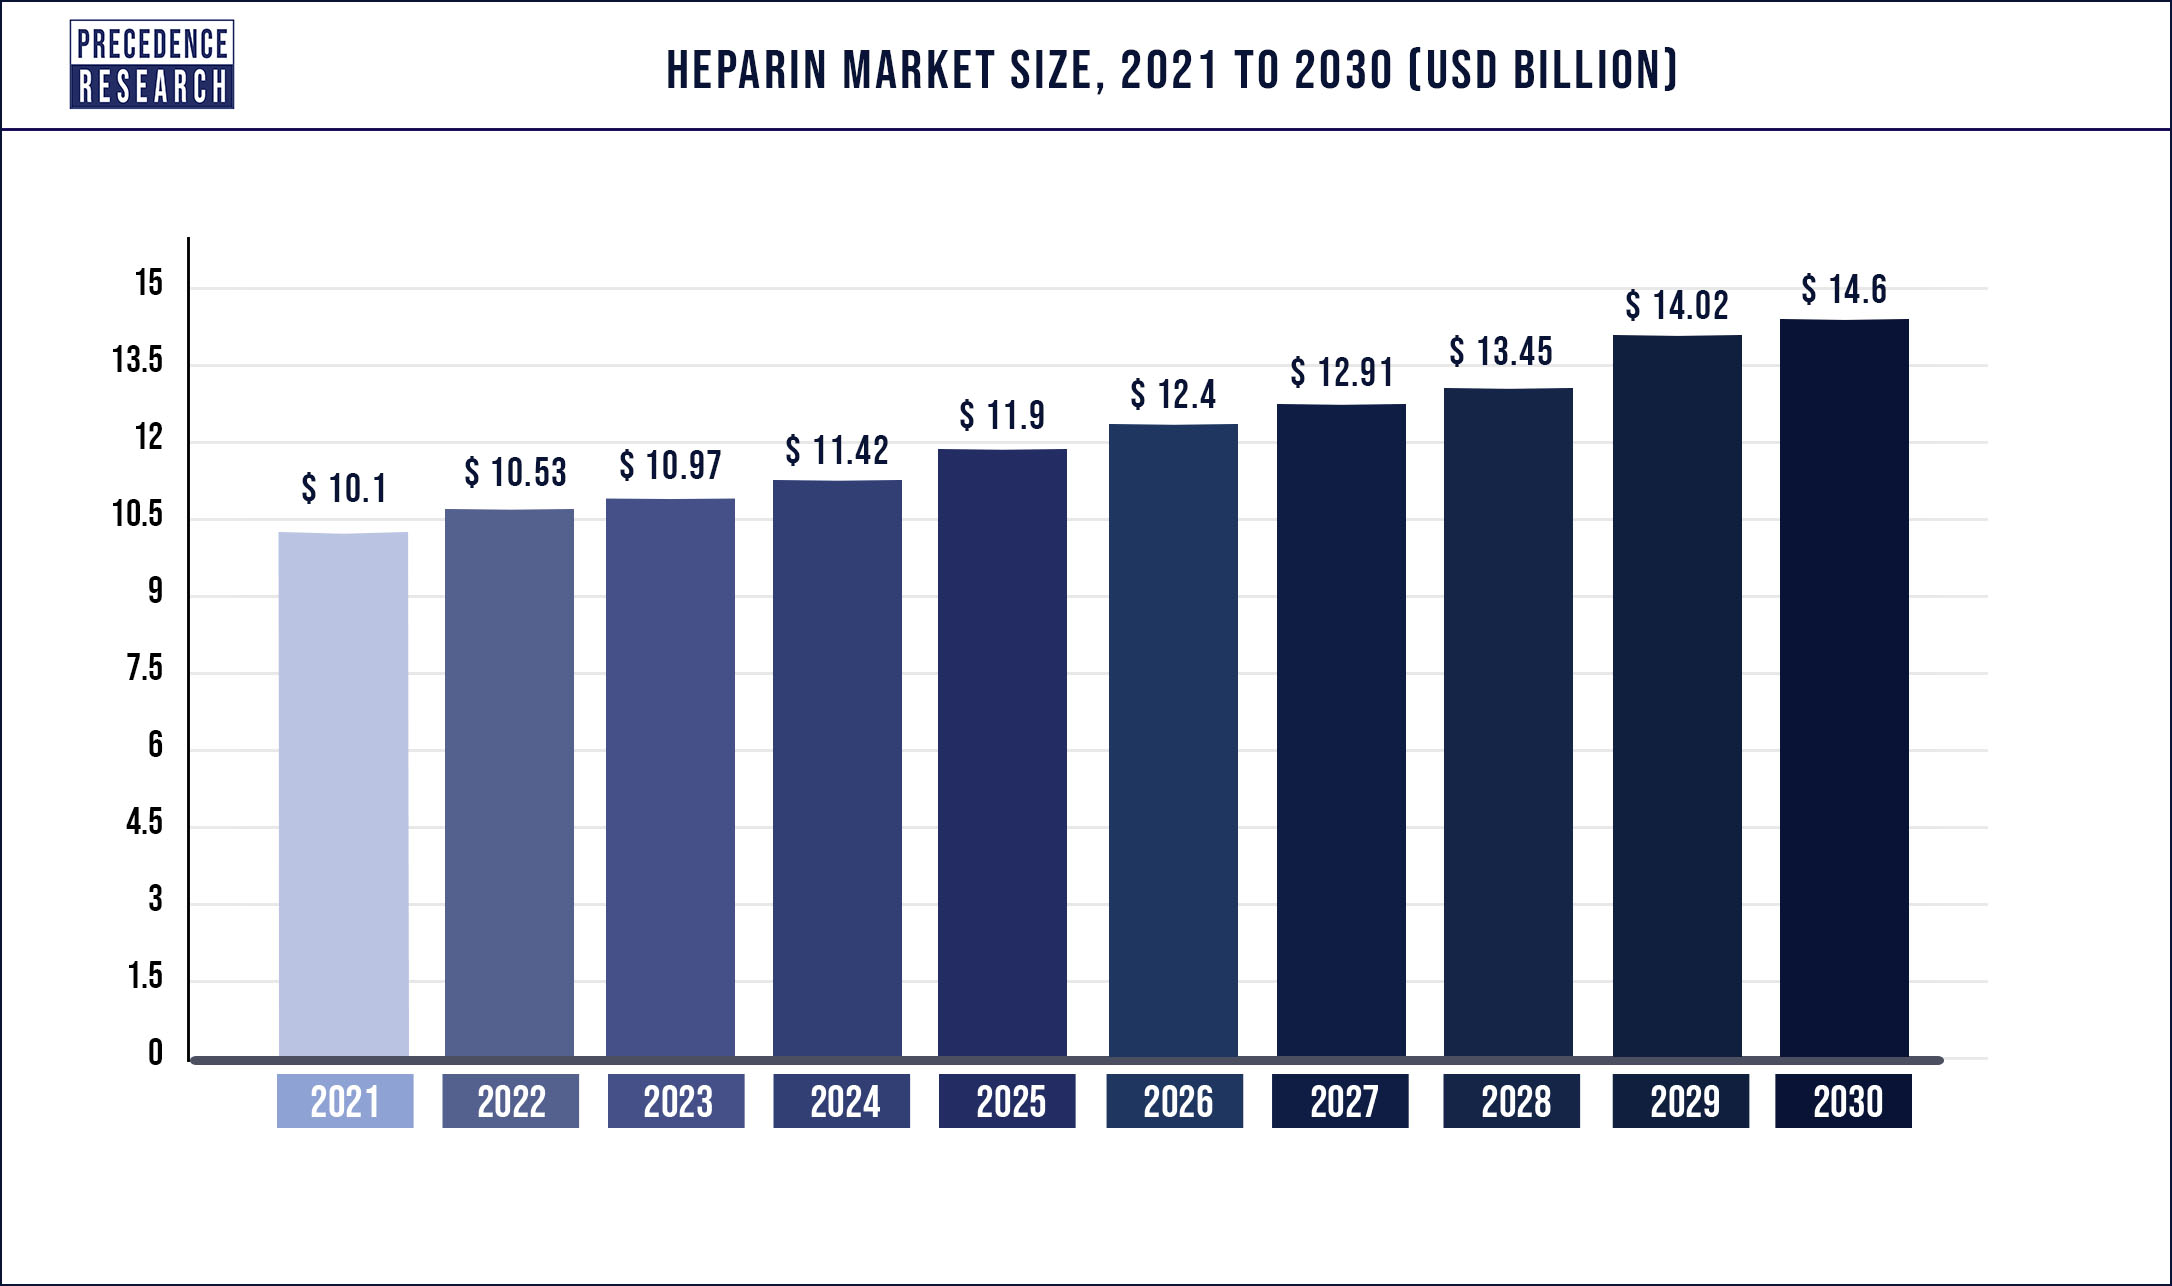 Heparin Market Size is Forecasted to Reach US$ 14.6 Billion by 2030